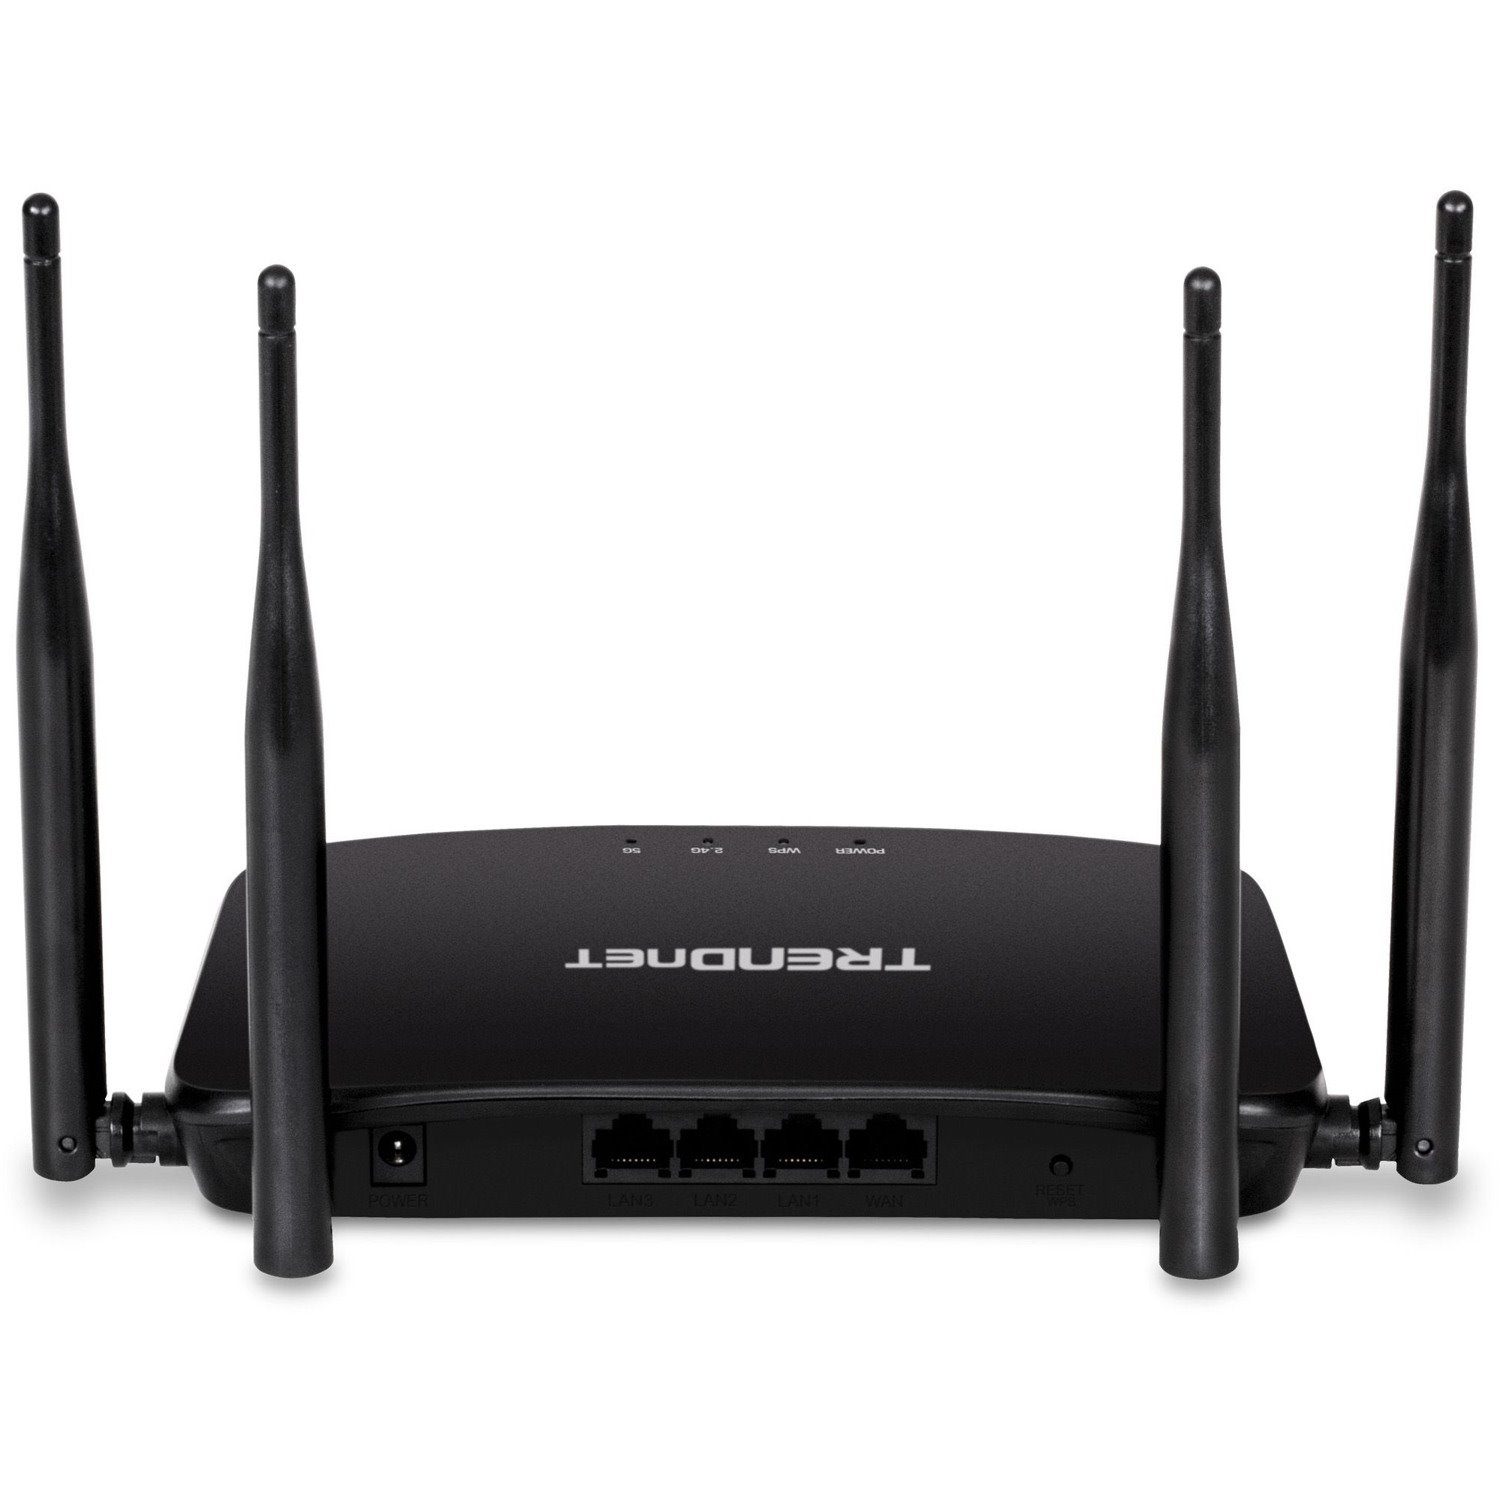 TRENDnet AC1200 Dual Band WiFi Router; TEW-831DR; 4 x 5dBi Antennas; Wireless AC 867Mbps; Wireless N 300Mbps; Business or Home Wireless AC Router for High Speed Internet; MU-MIMO Support